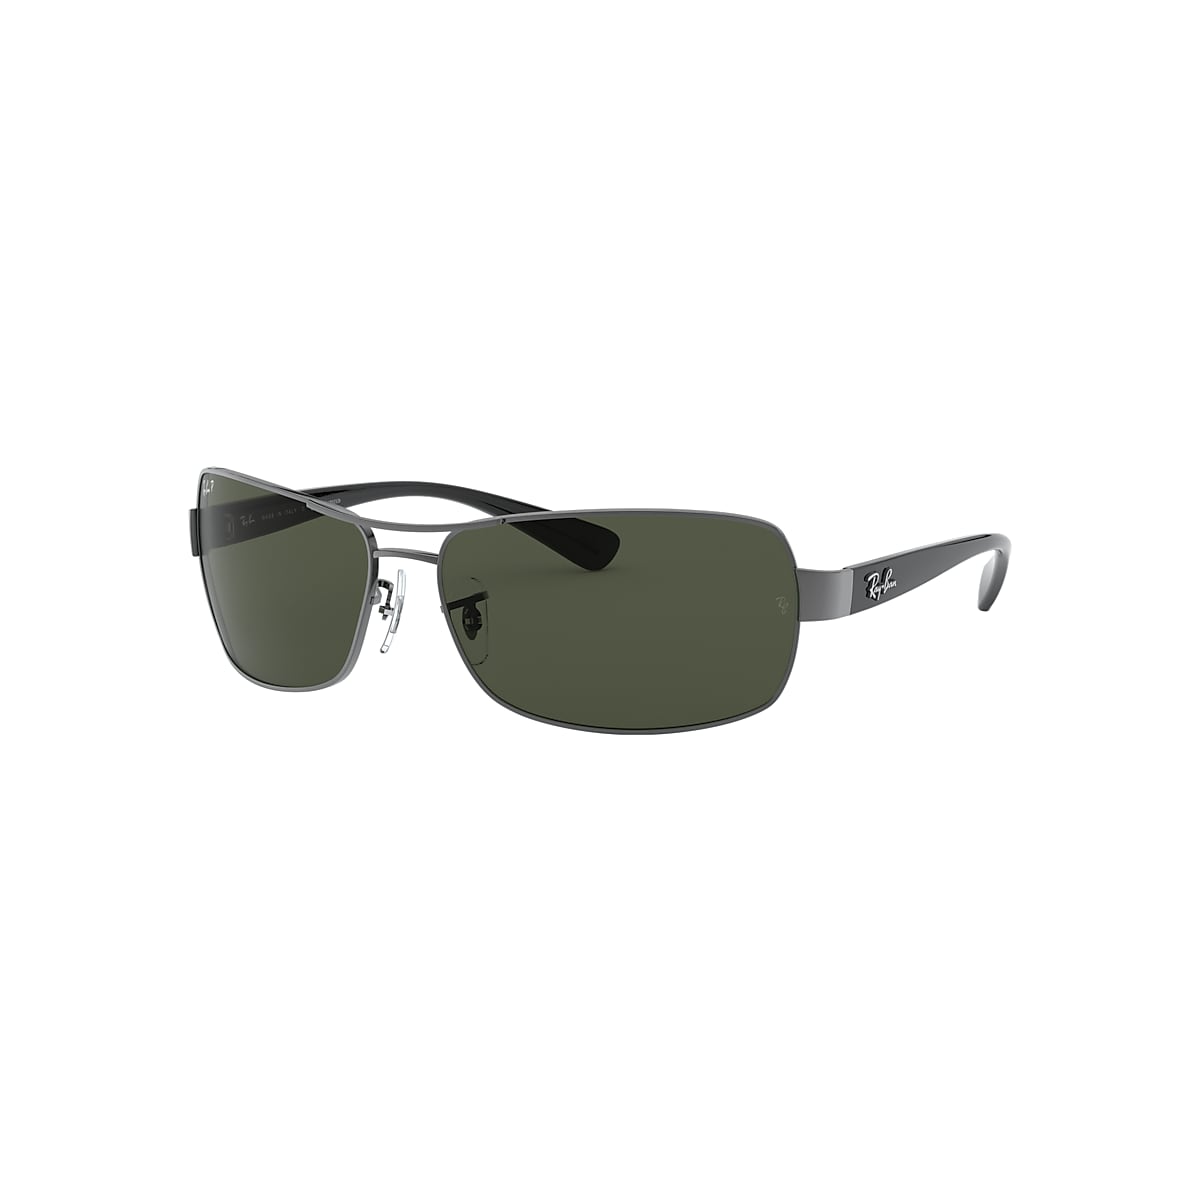 RB3379 Sunglasses in Gunmetal and Green - RB3379 | Ray-Ban® US